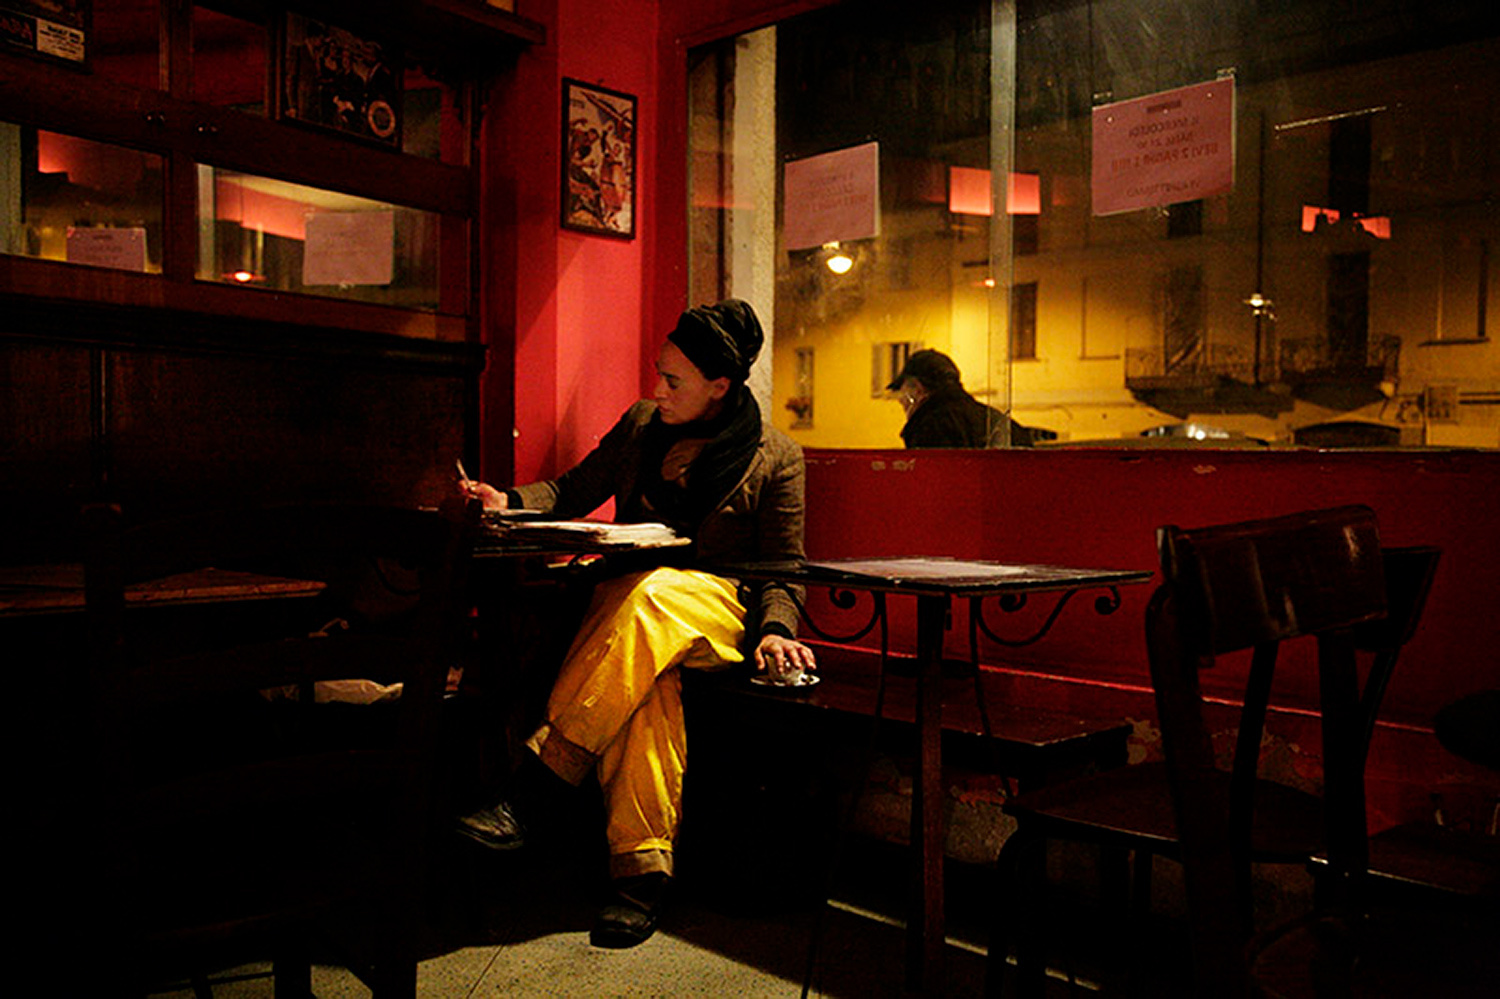 Barlife: The Girl with the Yellow Trousers by David Morris